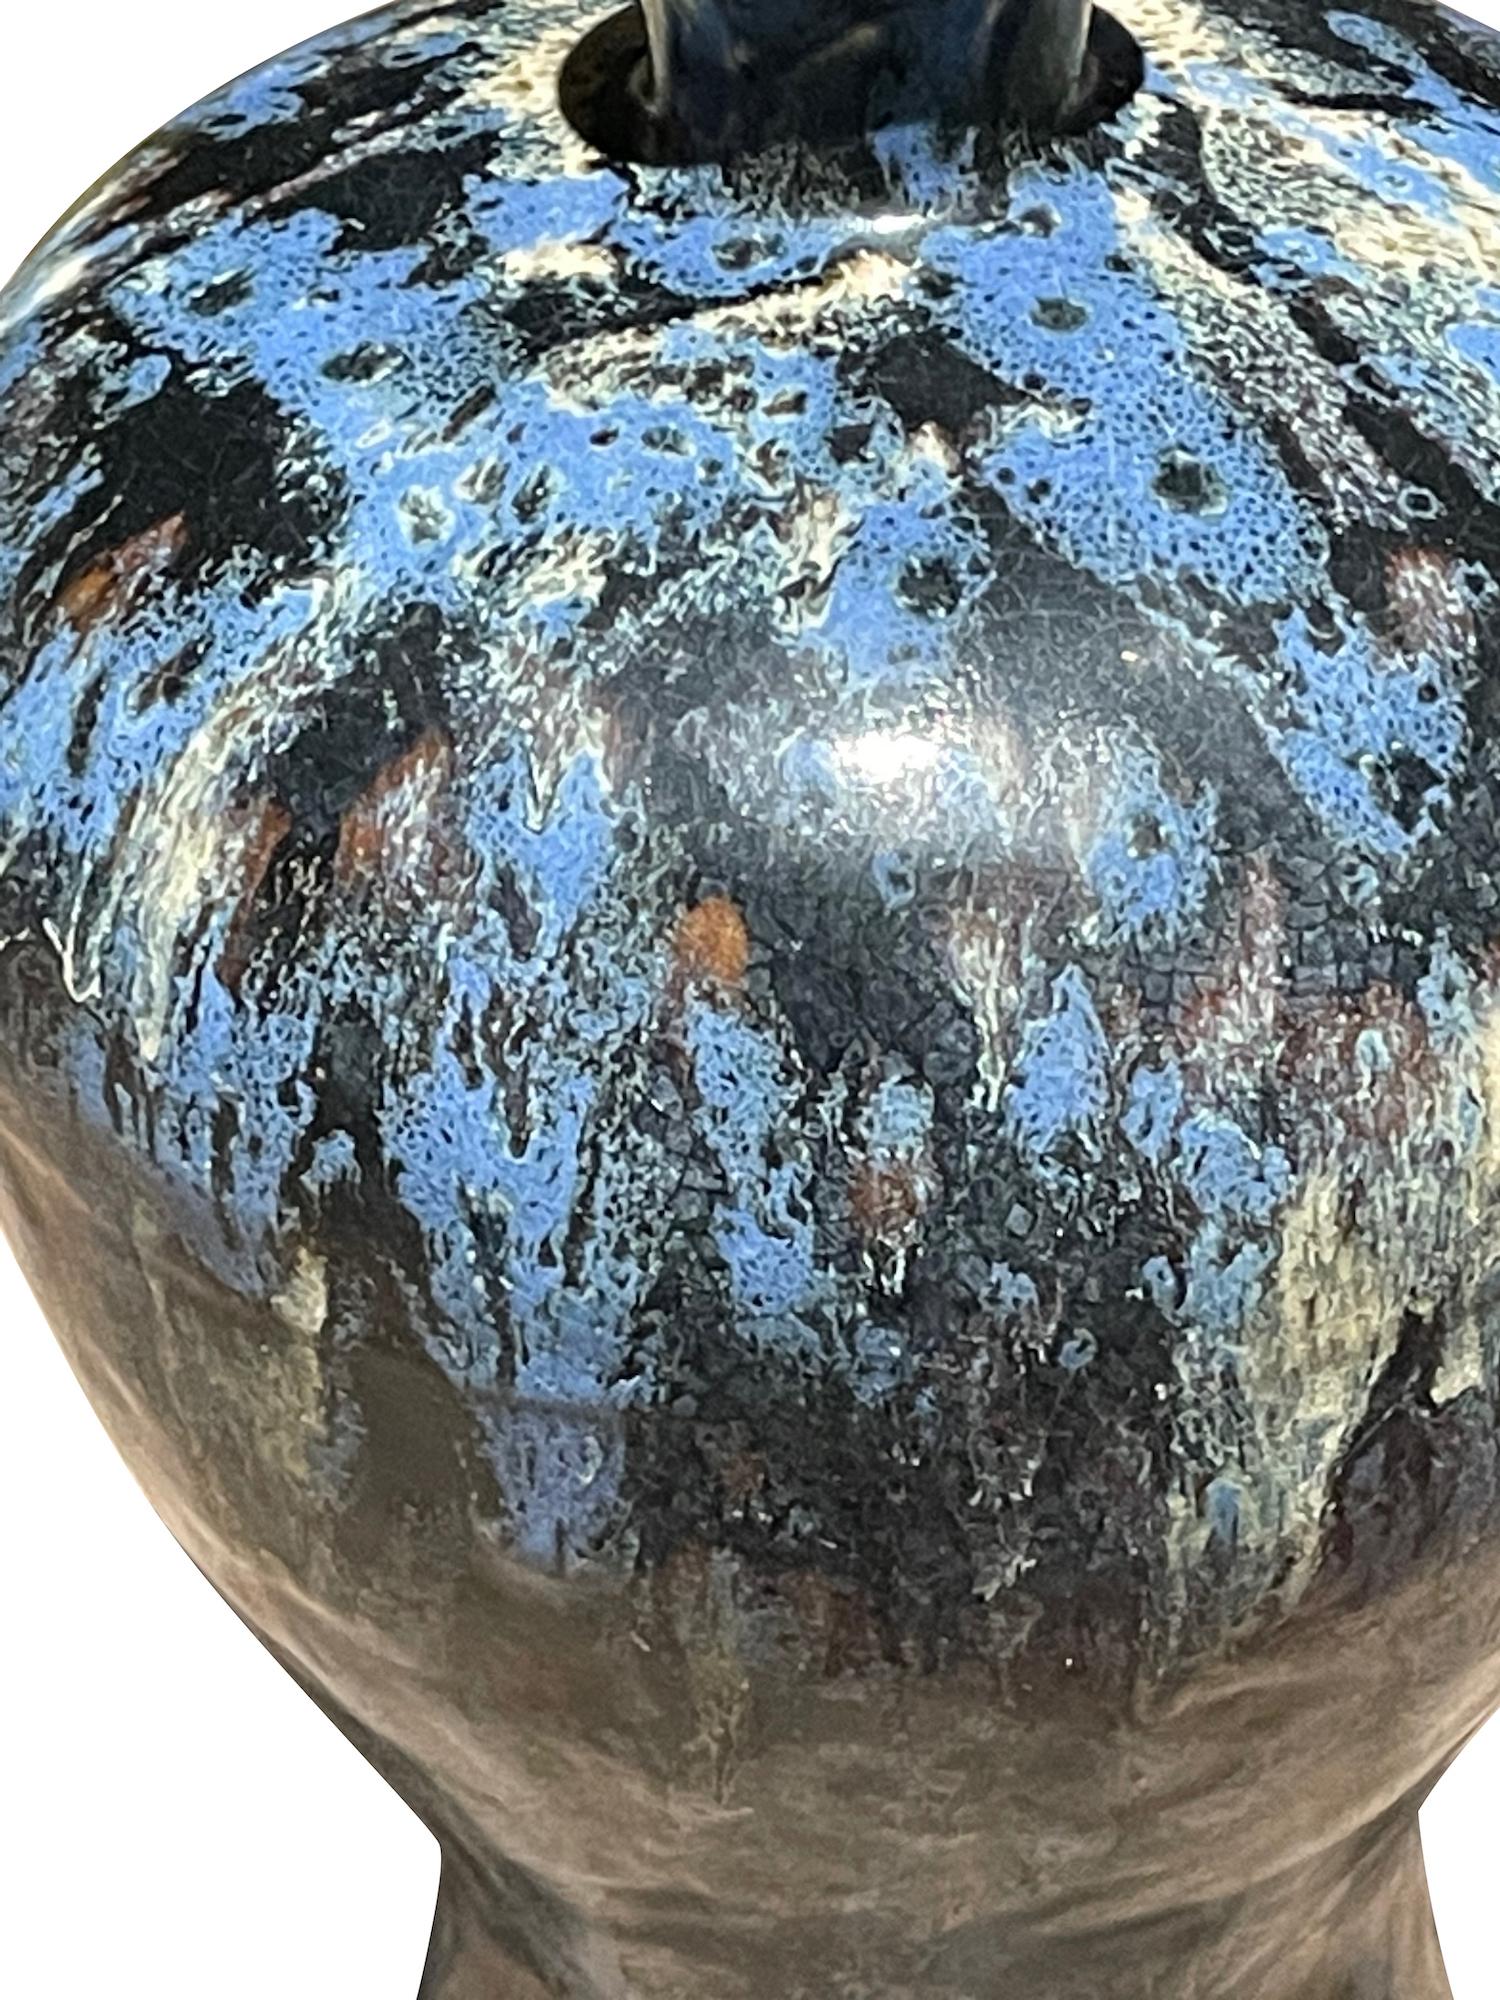 Contemporary Chinese curved shaped vase with black, blue and white splatter glaze.
One of several from collection of similar glaze in various shapes.
Sold individually.
